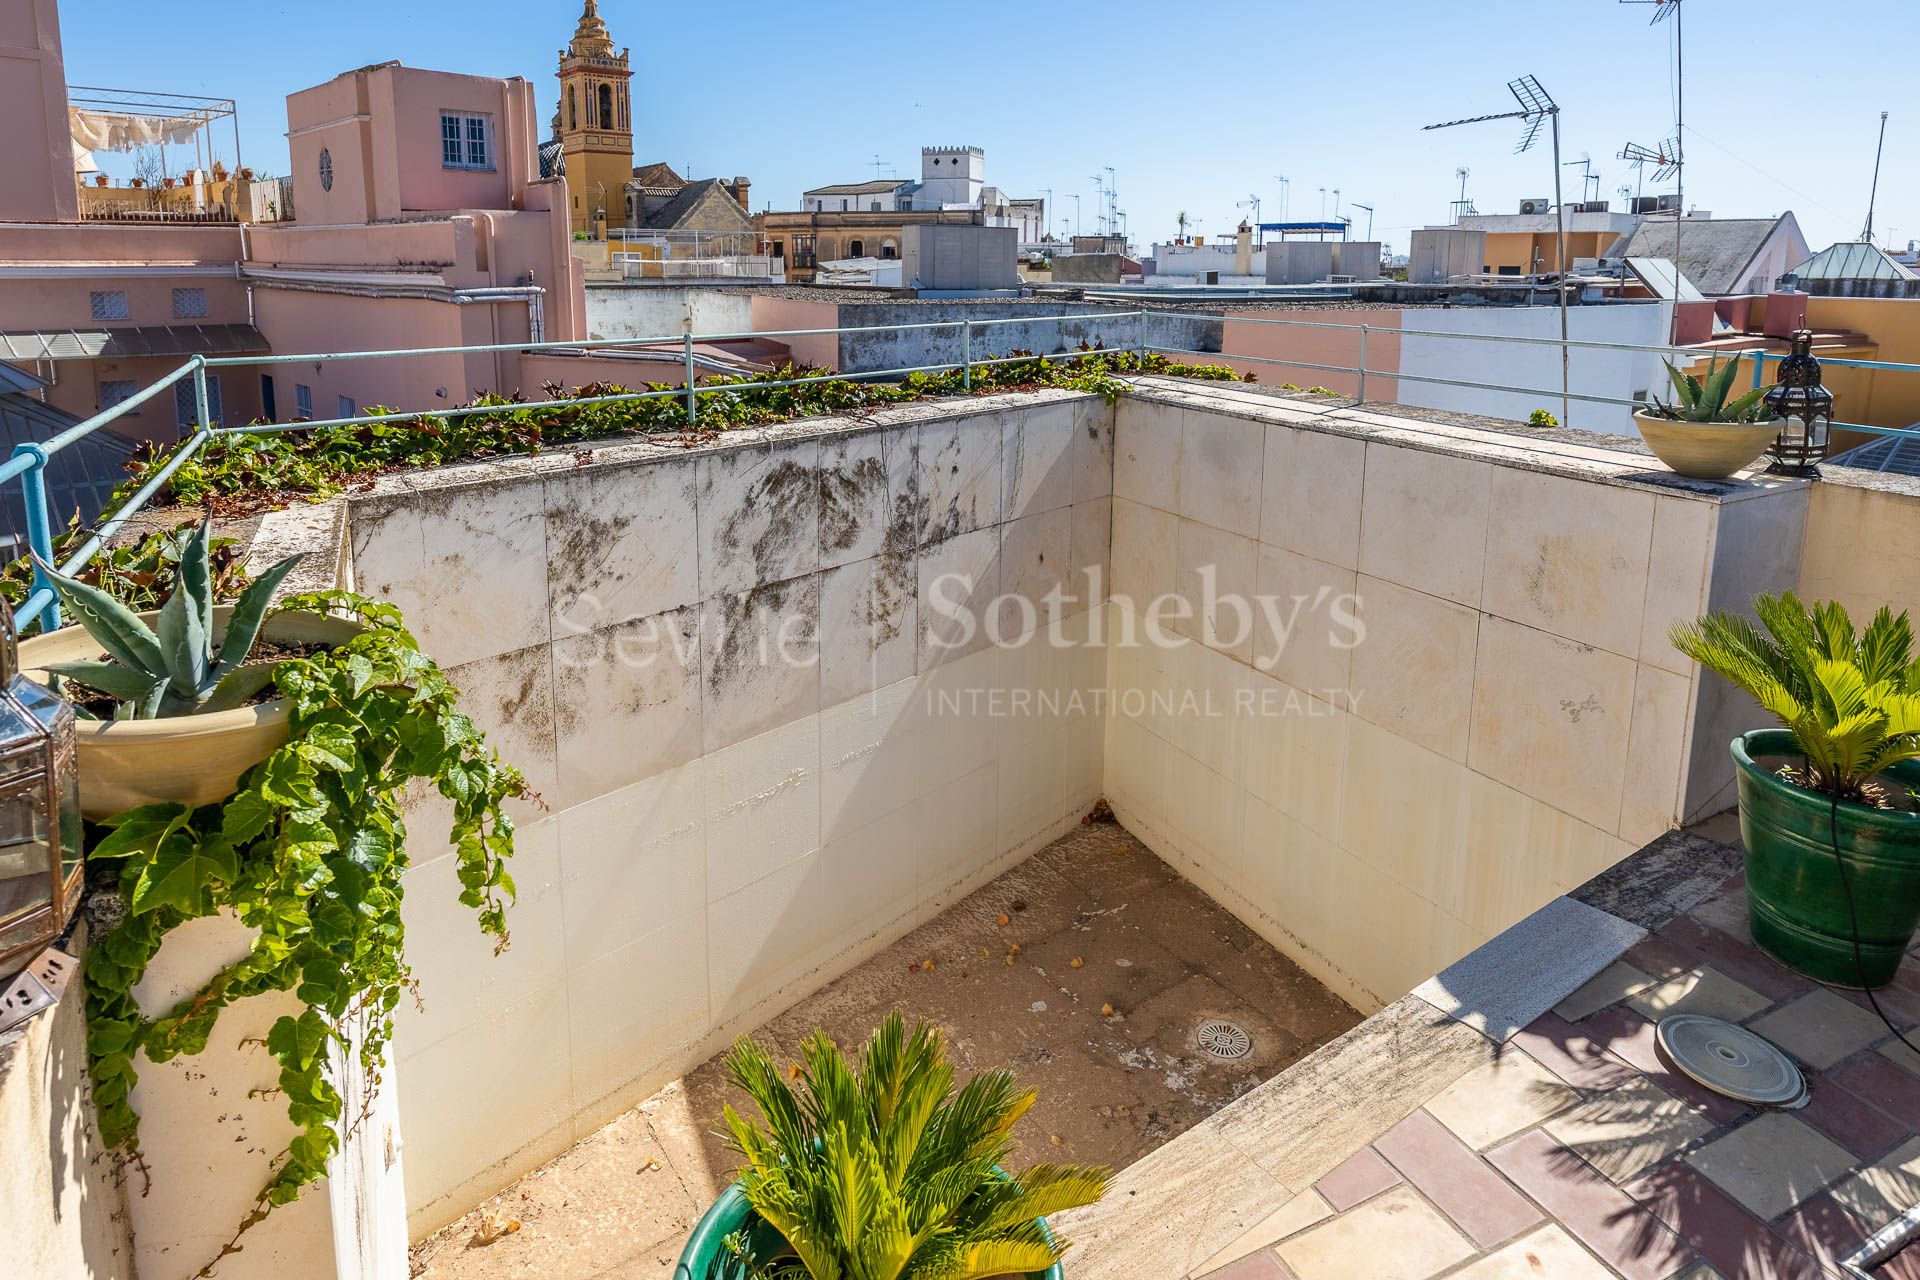 One-of-a-kind apartment with a terrace, swimming pool and singular views of the Giralda.